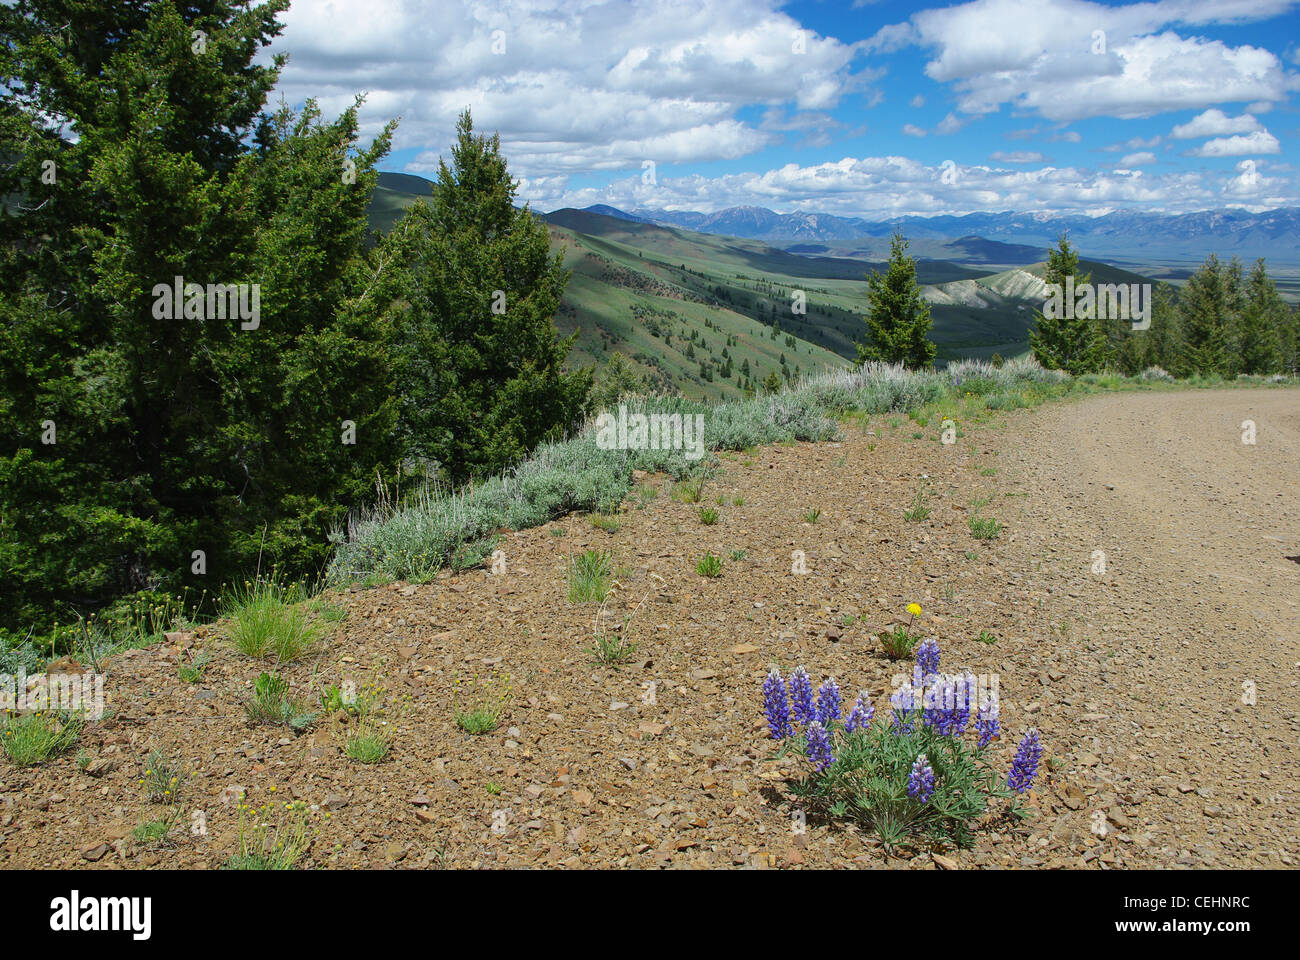 Flowers on gravel road with view of hills, vast valleys and Hawley Mountains, Challis National Forest, Idaho Stock Photo